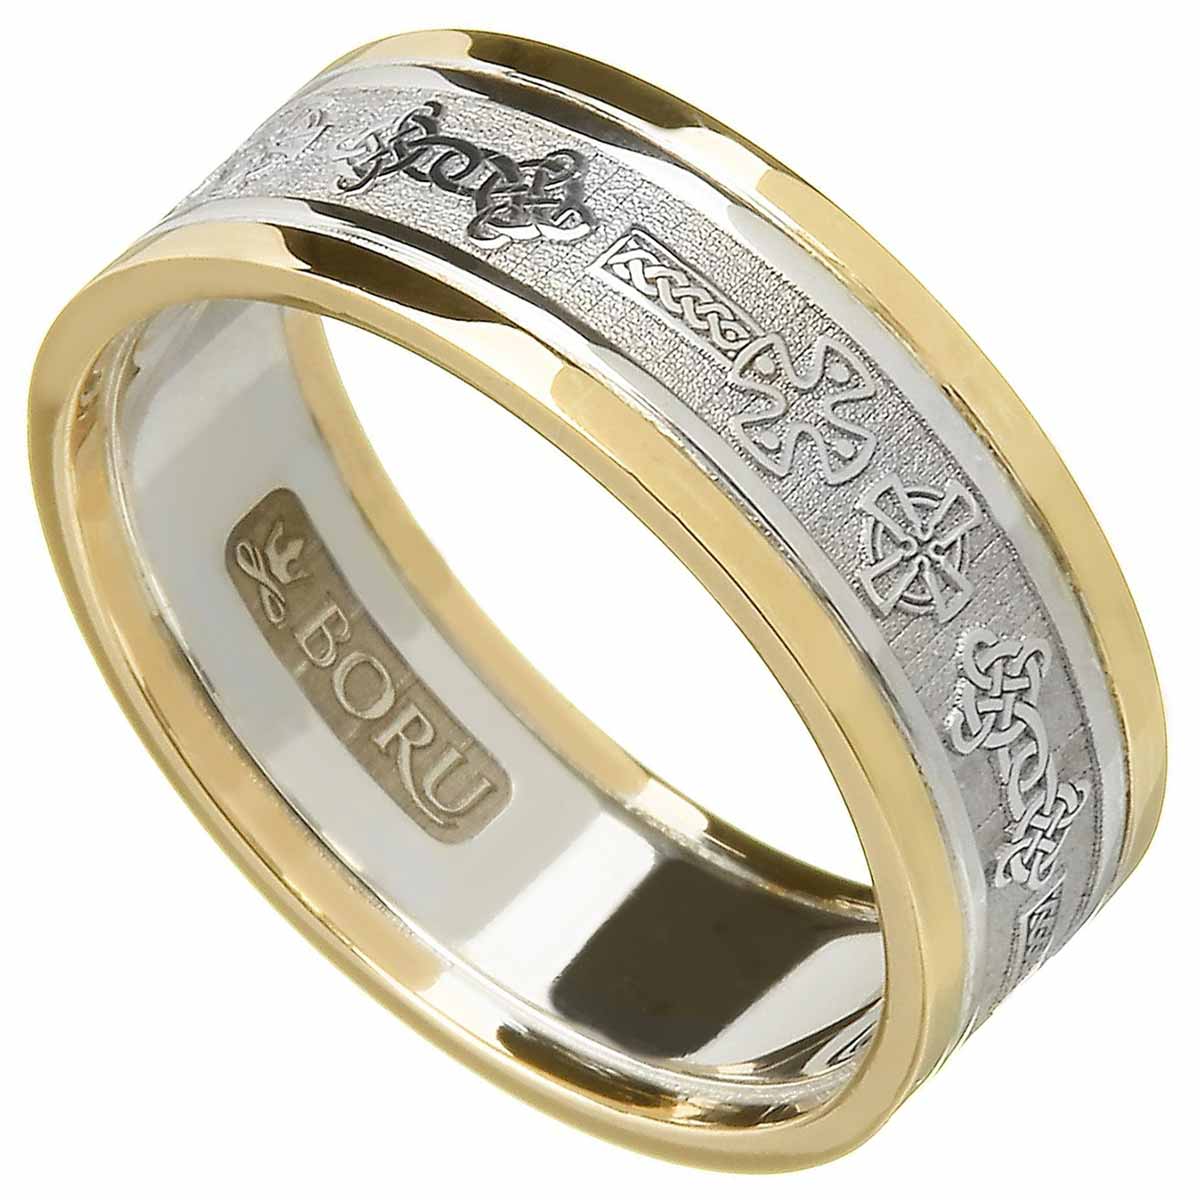 Product image for Celtic Ring - Ladies White Gold with Yellow Gold Trim Celtic Cross Wedding Ring